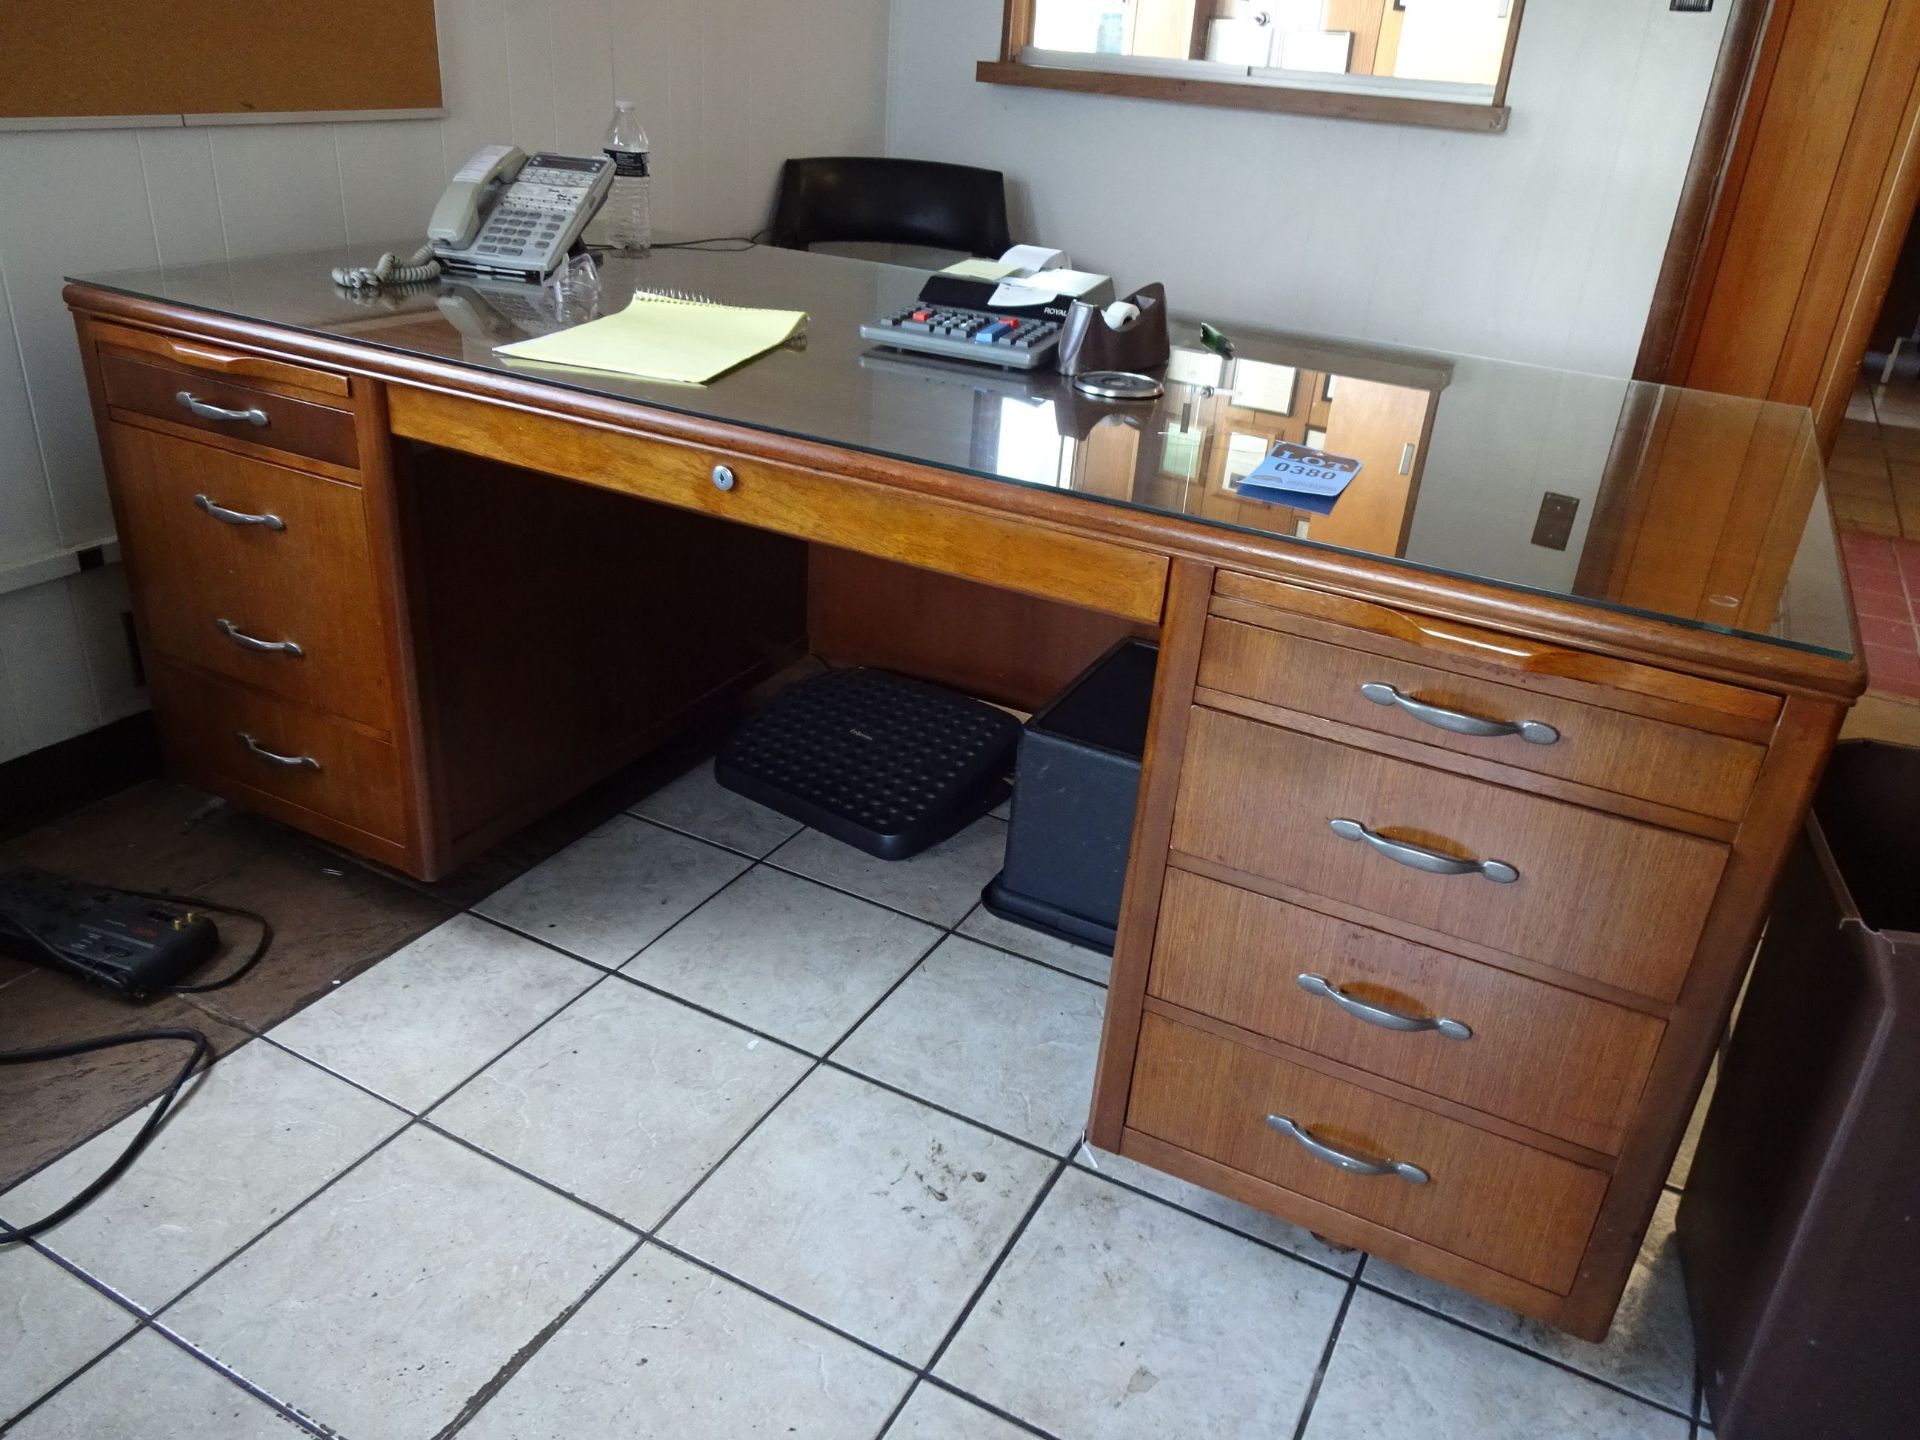 (LOT) WOOD DESK, (2) CABINETS, BROTHER INTELLIFAX 2840 FAX MACHINE